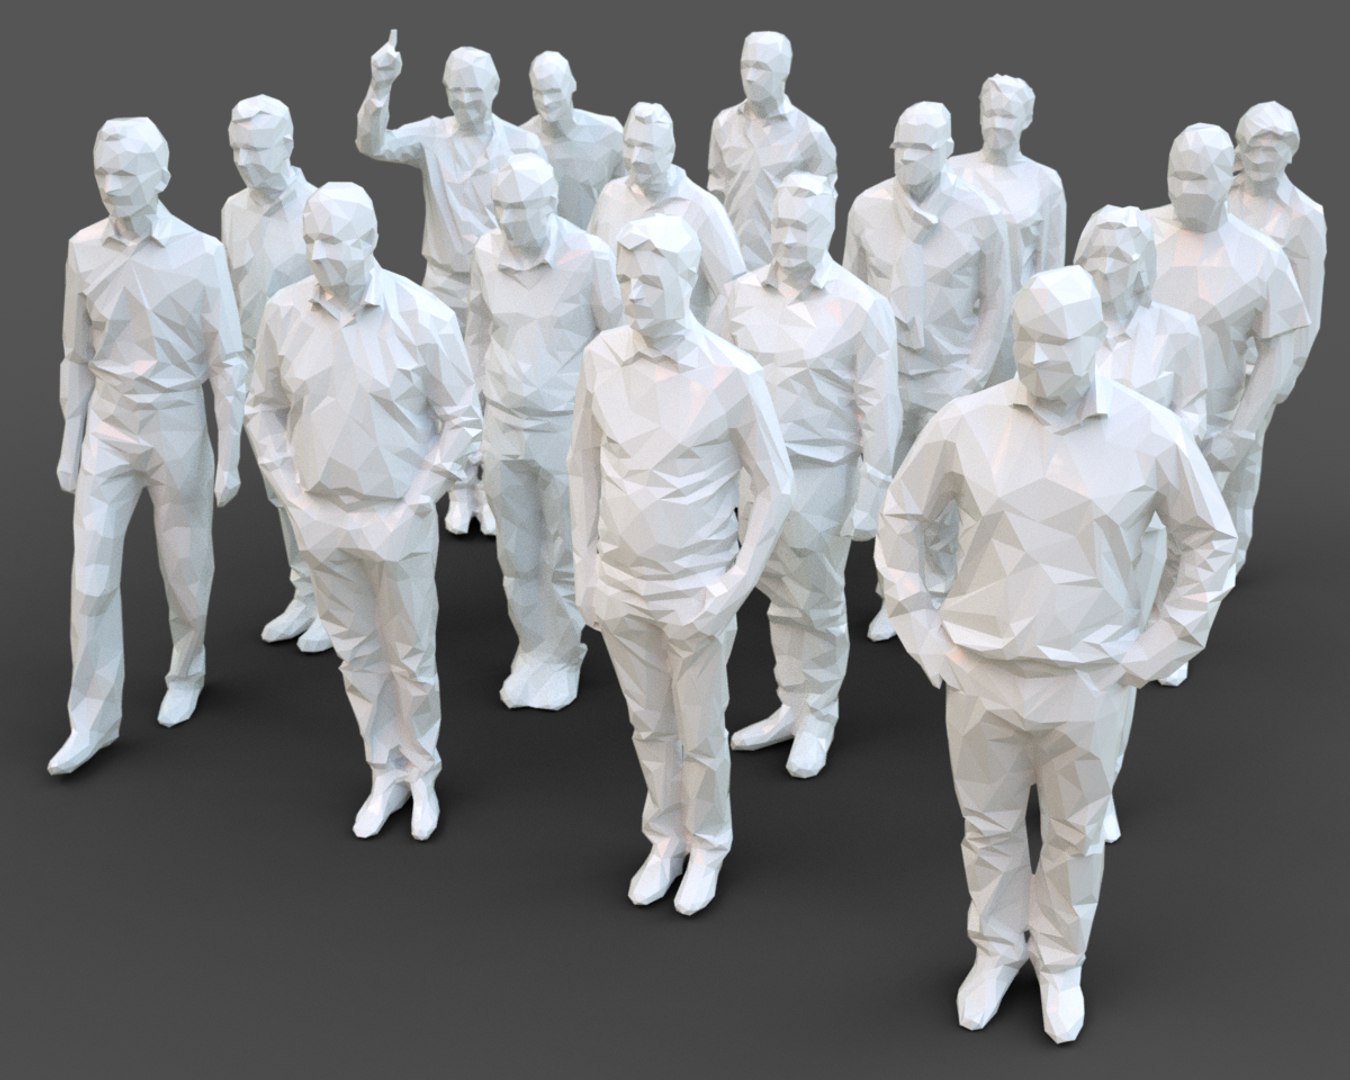 Architectural stylized human character 3D model | 1147643 | TurboSquid